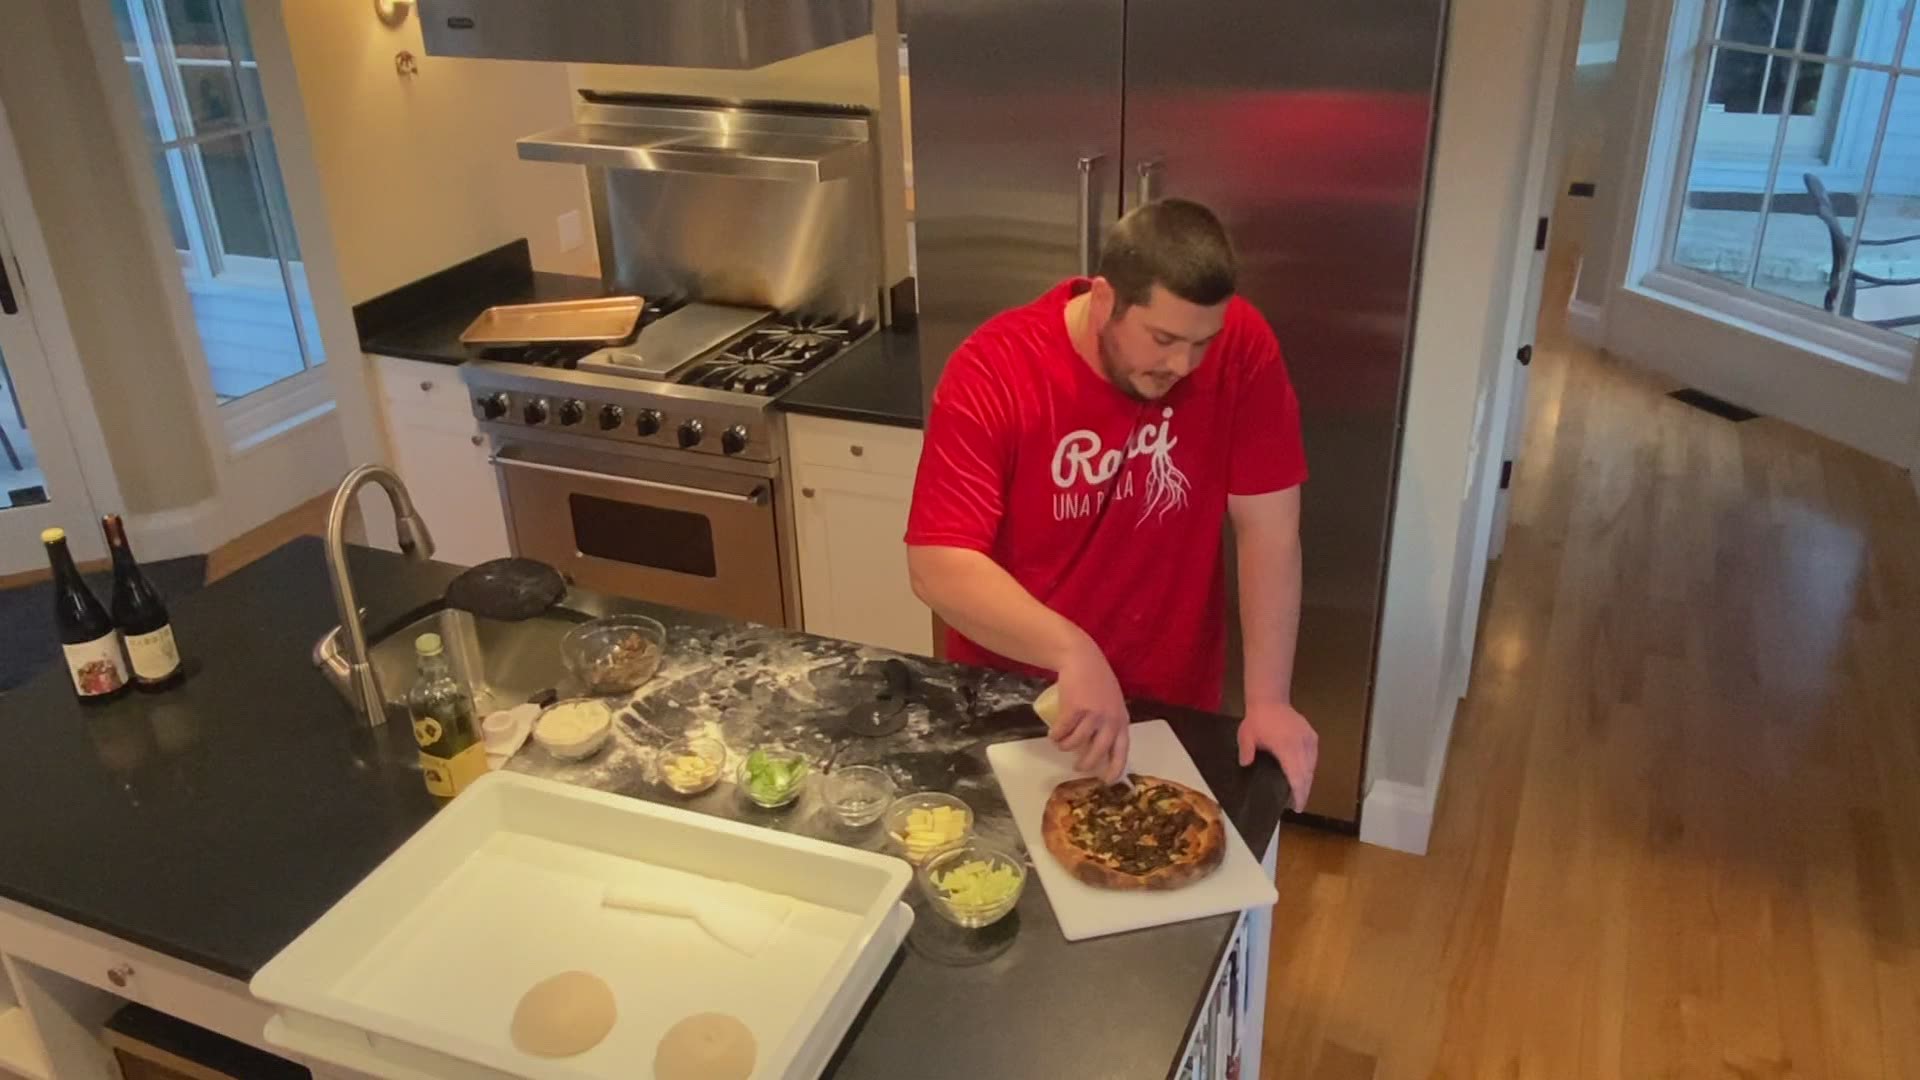 Randy Forrester from Radici Una Pizzaria shares the secrets to making a delicious pizza.